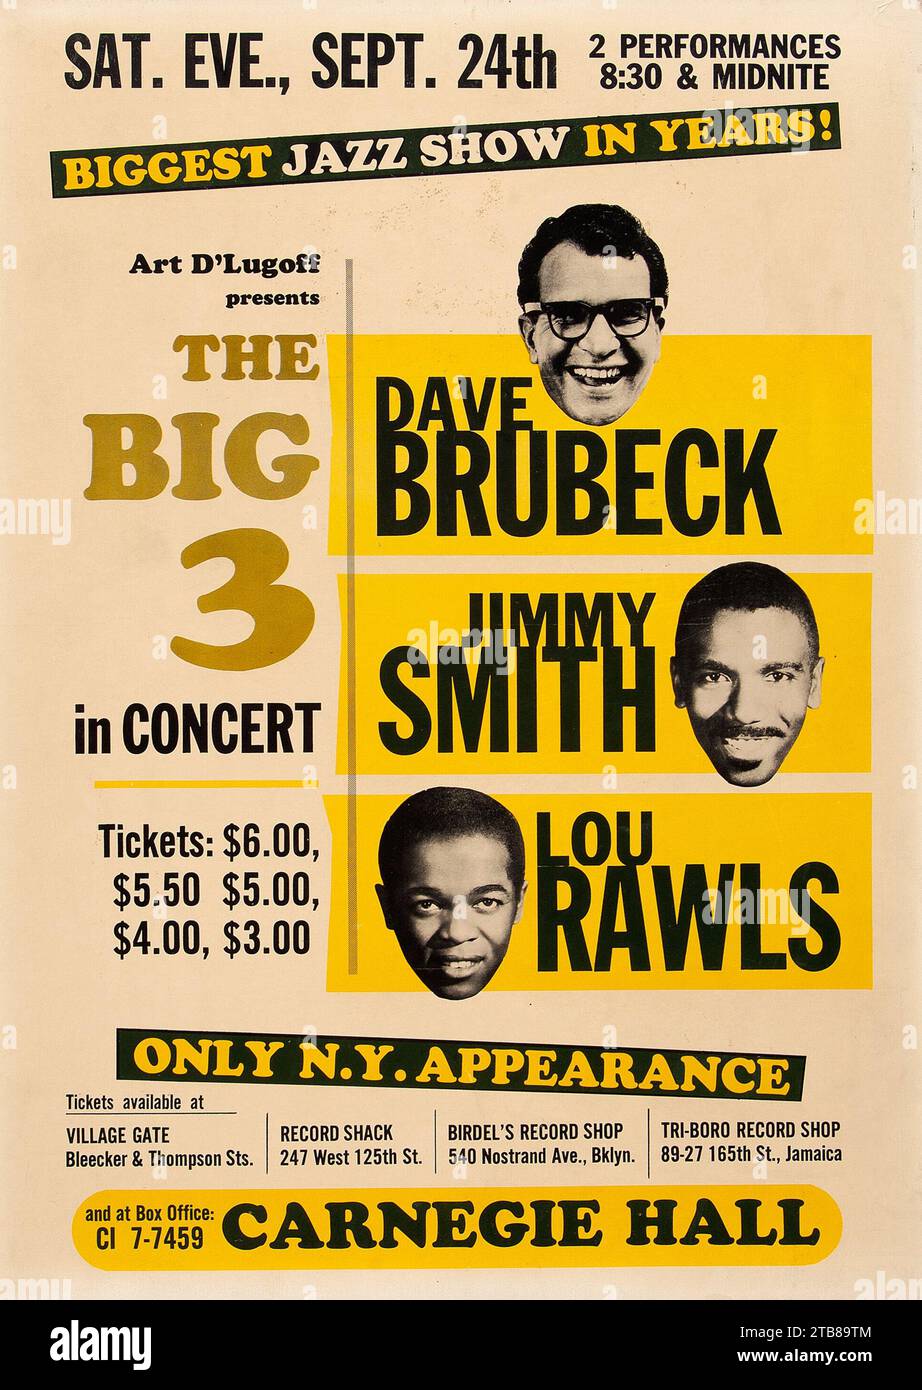 Vintage Jazz poster - Dave Brubeck, Lou Rawls, Jimmy Smith 1966 Carnegie Hall, NYC Concert Poster Stock Photo